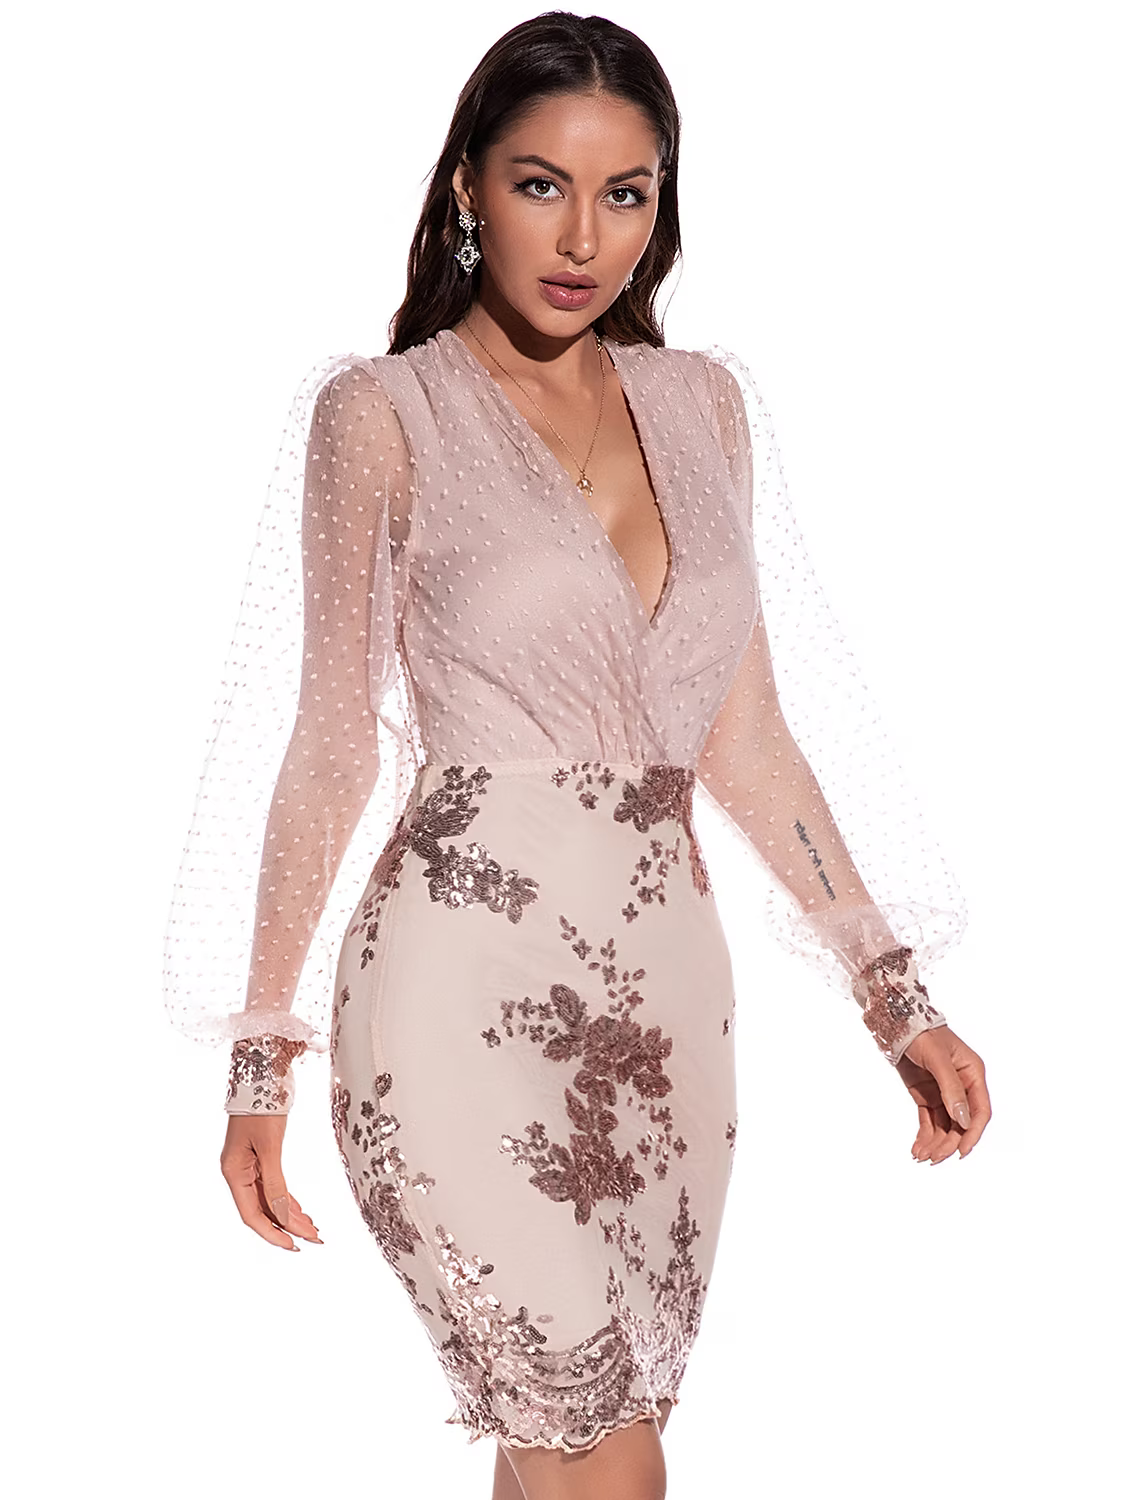 Sexy Holiday Party Wear Dress V Neck Long Sleeve Short Mini Spandex with Sequin